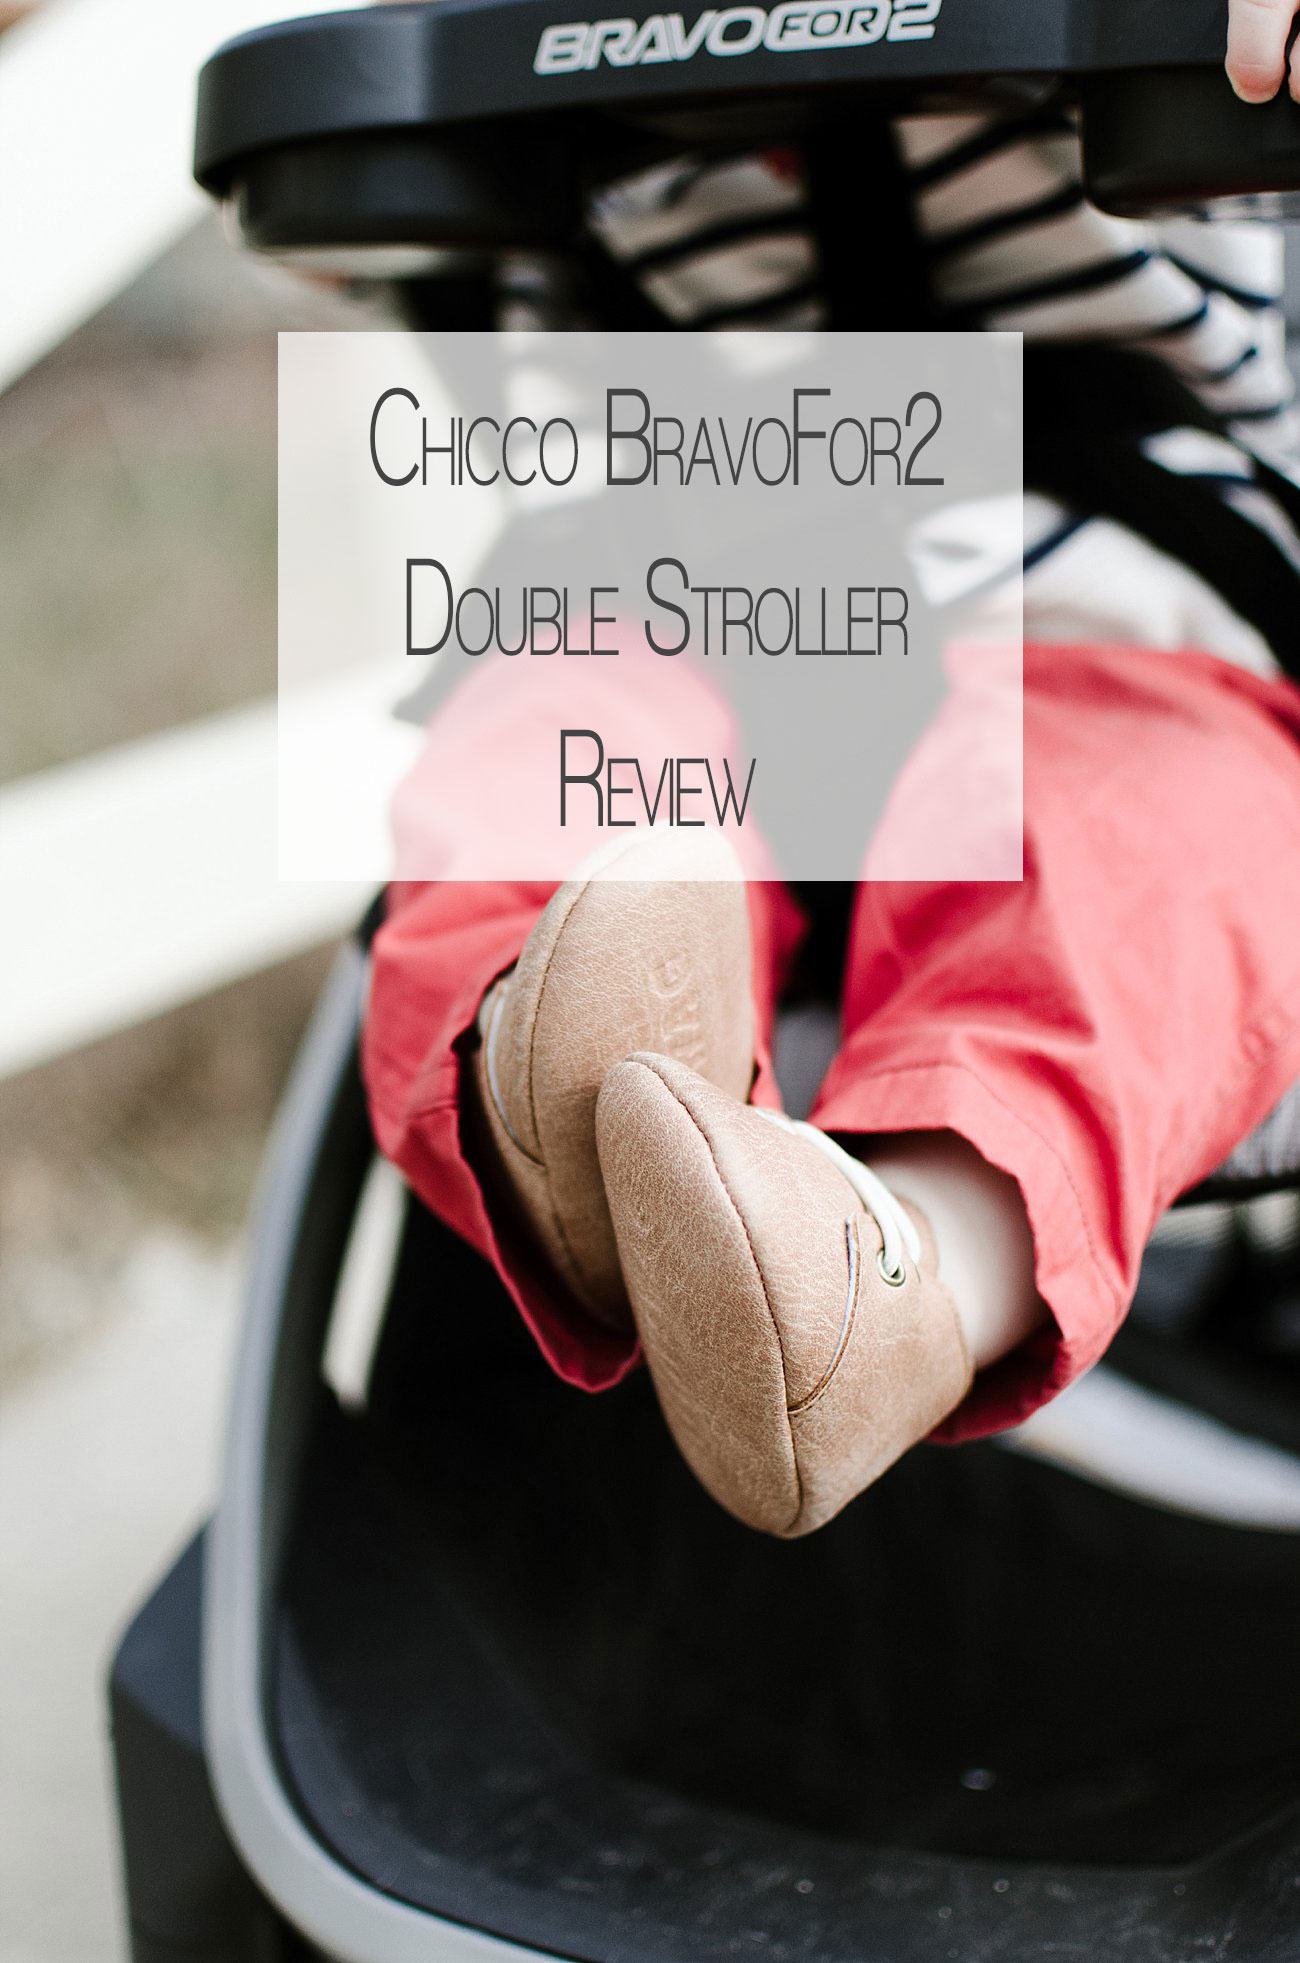 Best double stroller for a baby and toddler - sit and stand double stroller - Chicco BravoFor2 Double Stroller Review (1)